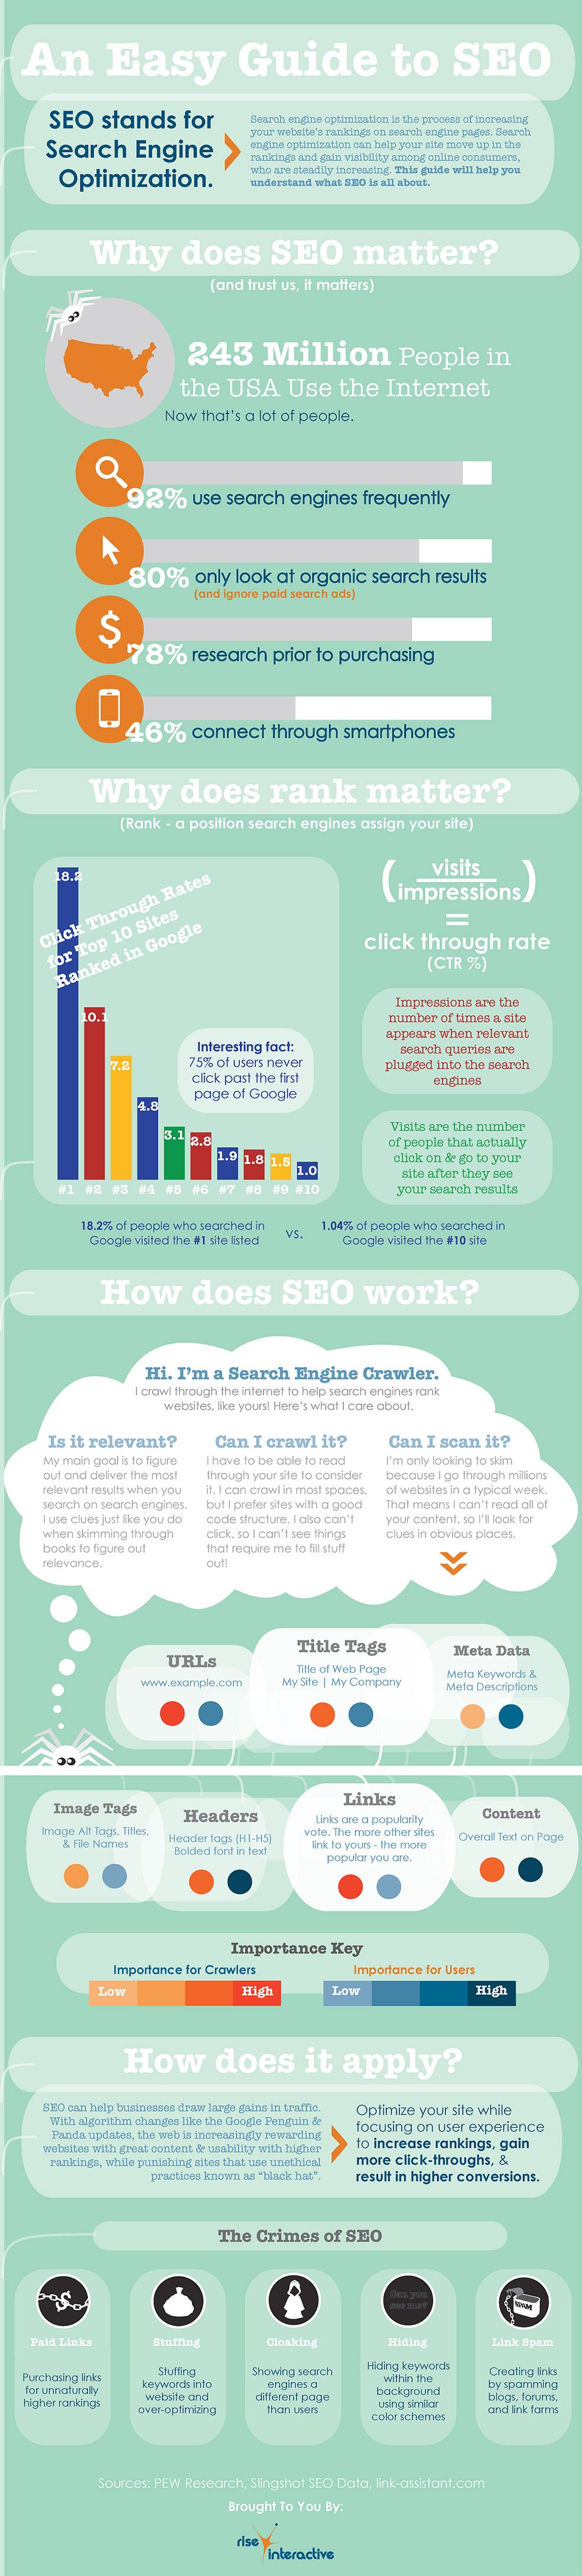 seo guide infographic